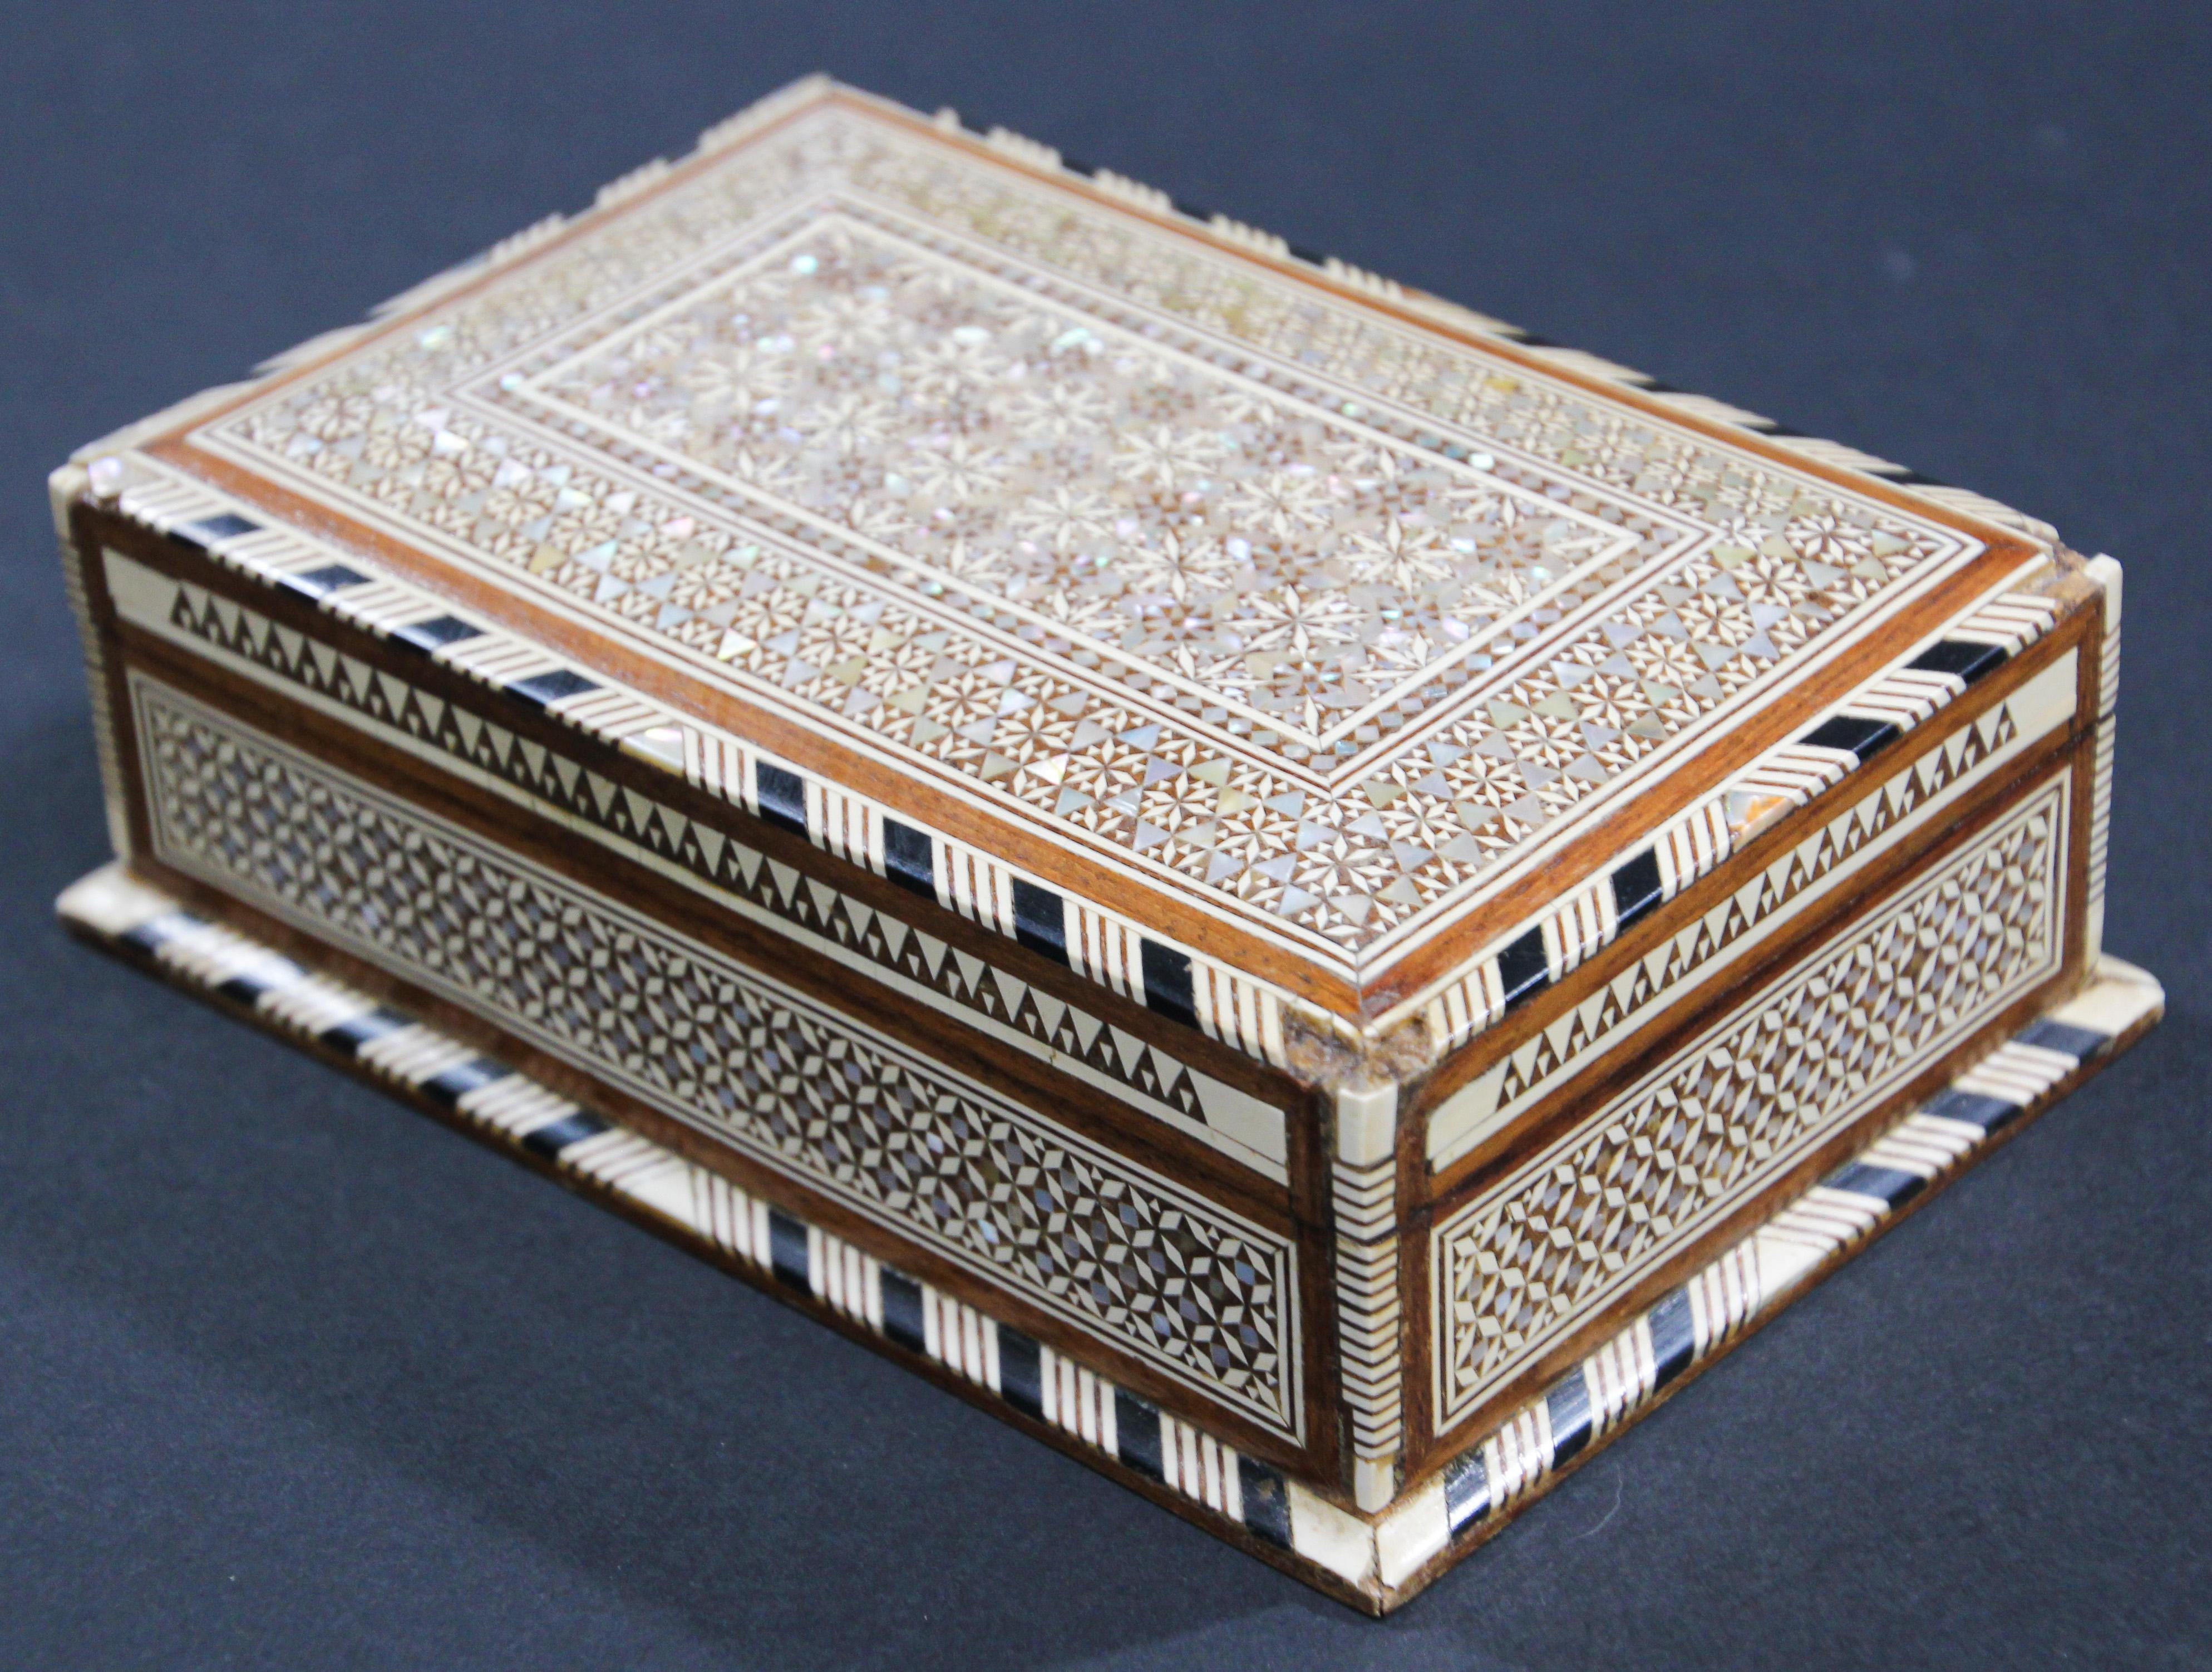 Moorish Handcrafted Middle Eastern Mosaic Inlaid Decorative Box For Sale 3